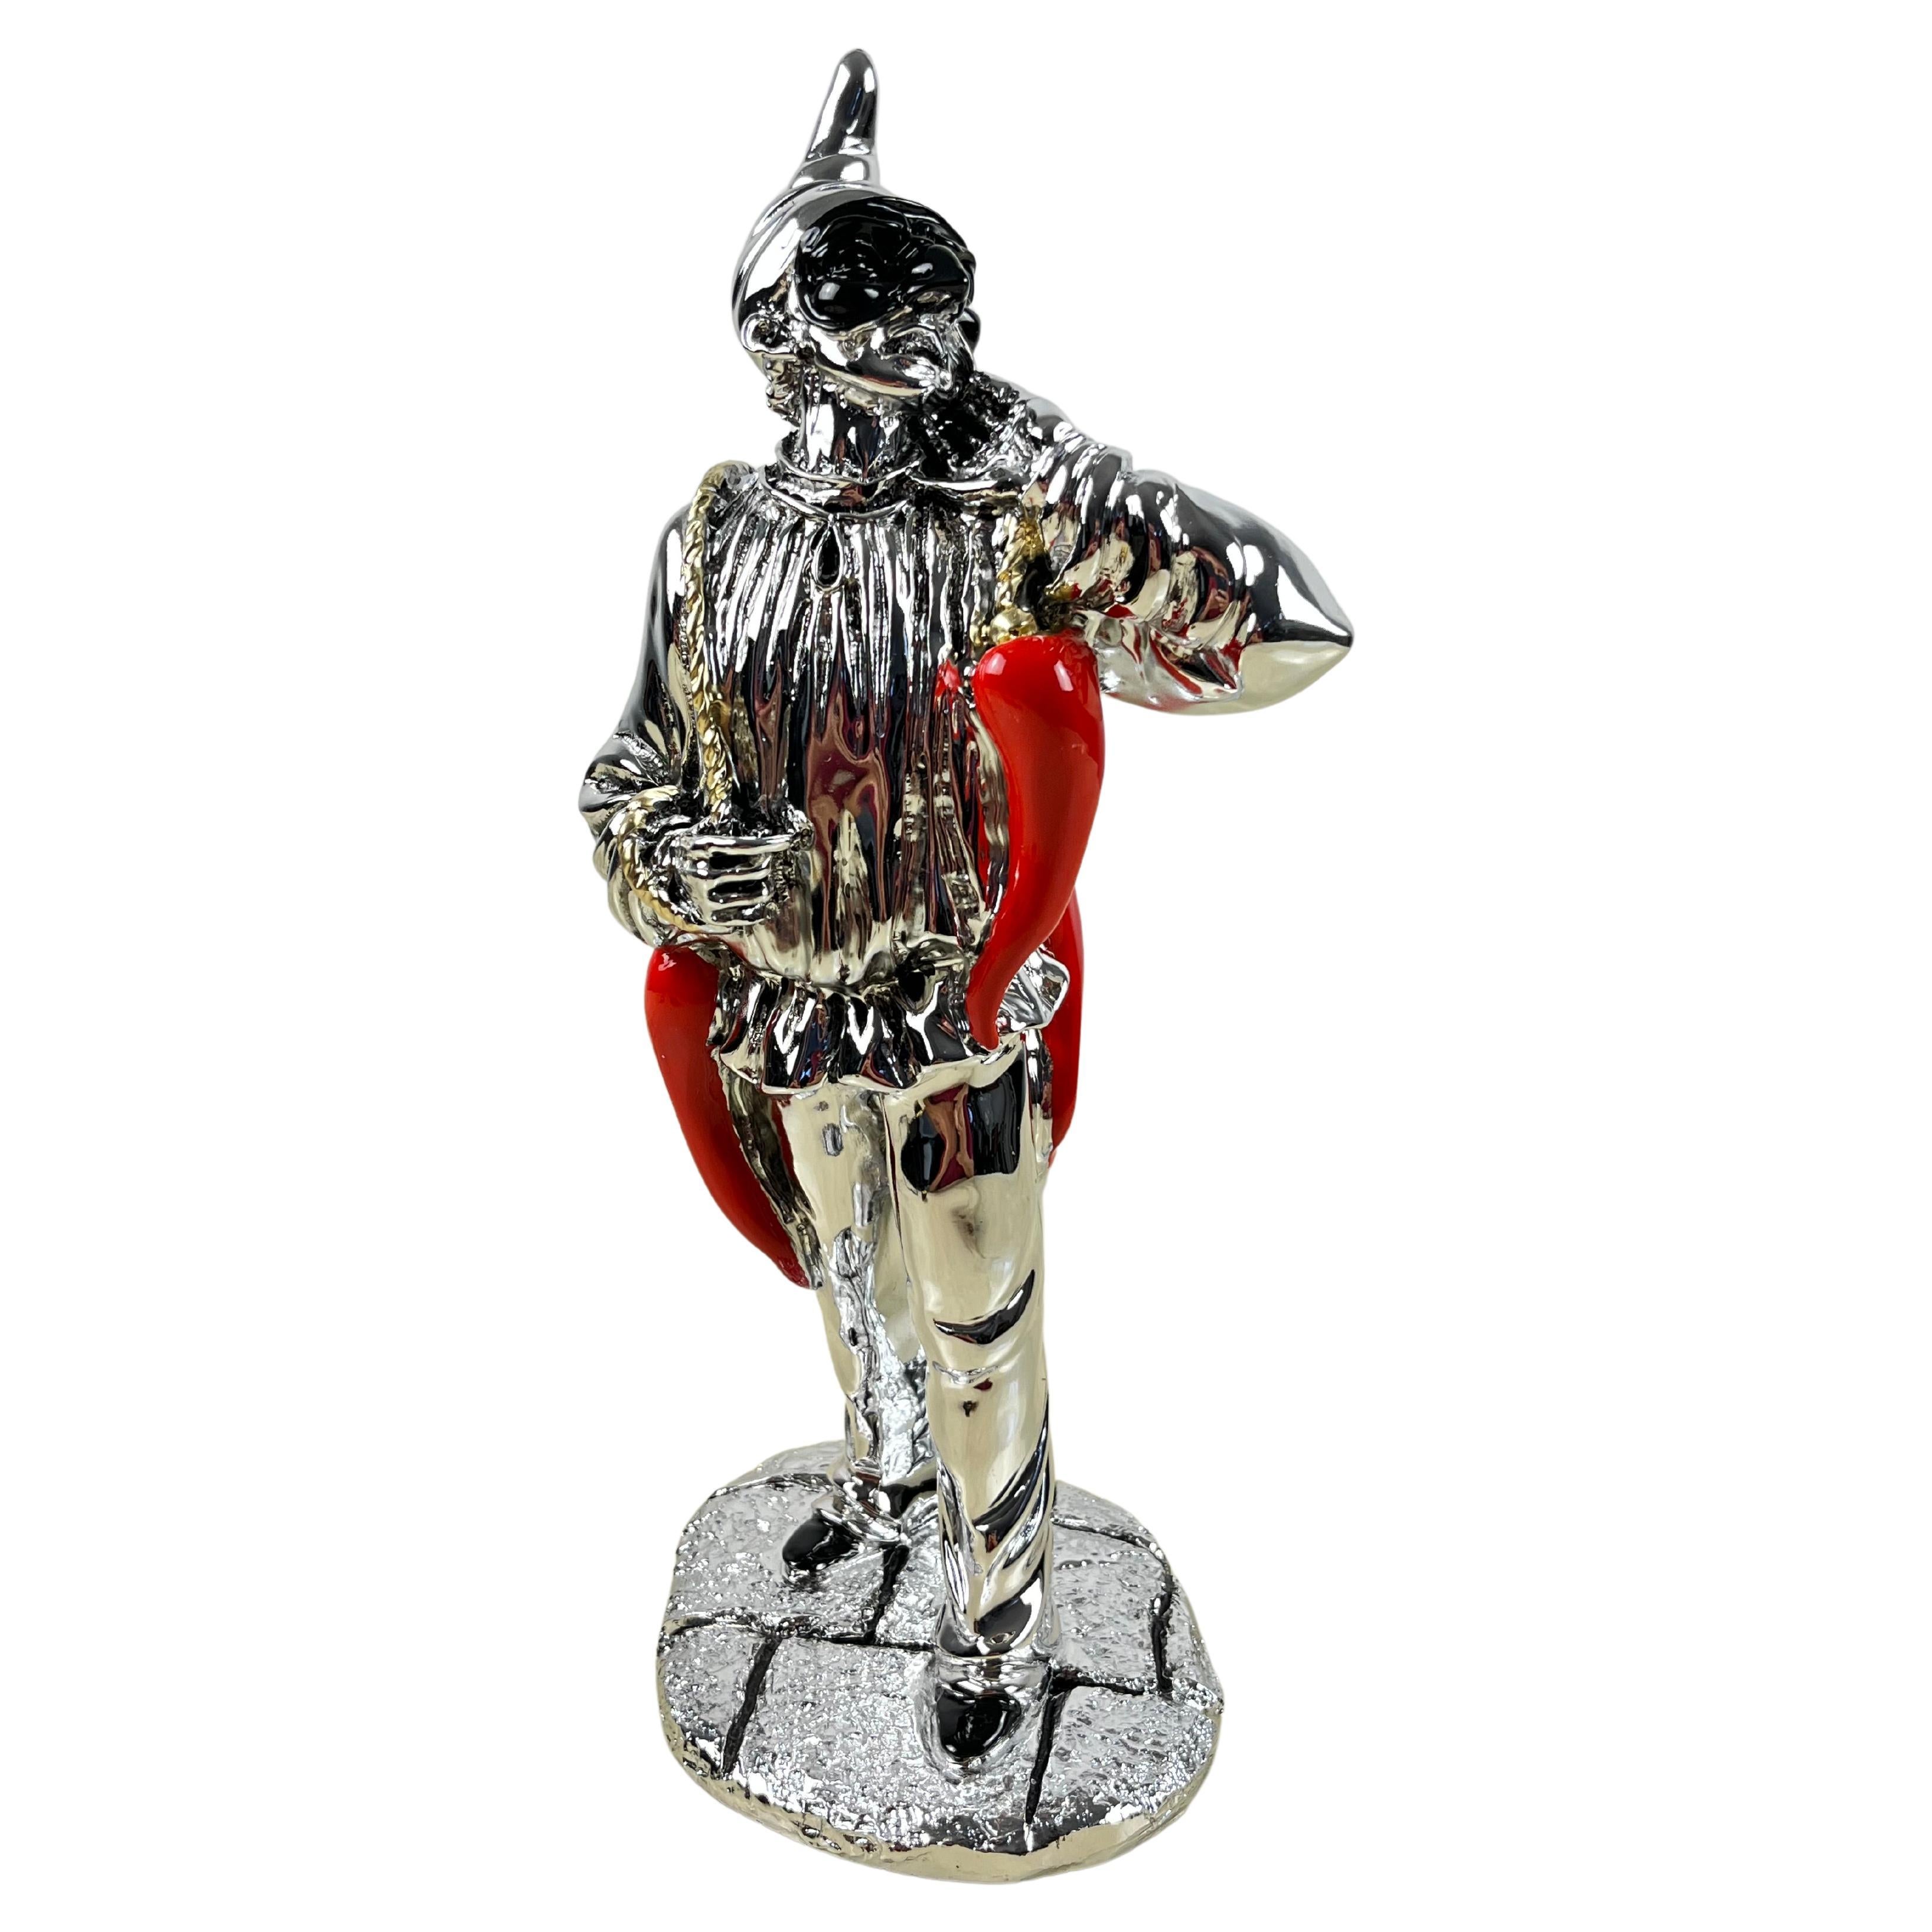 Neapolitan Pulcinella in silver foil, made in Italy, 90s
Very good condition, enamelled parts